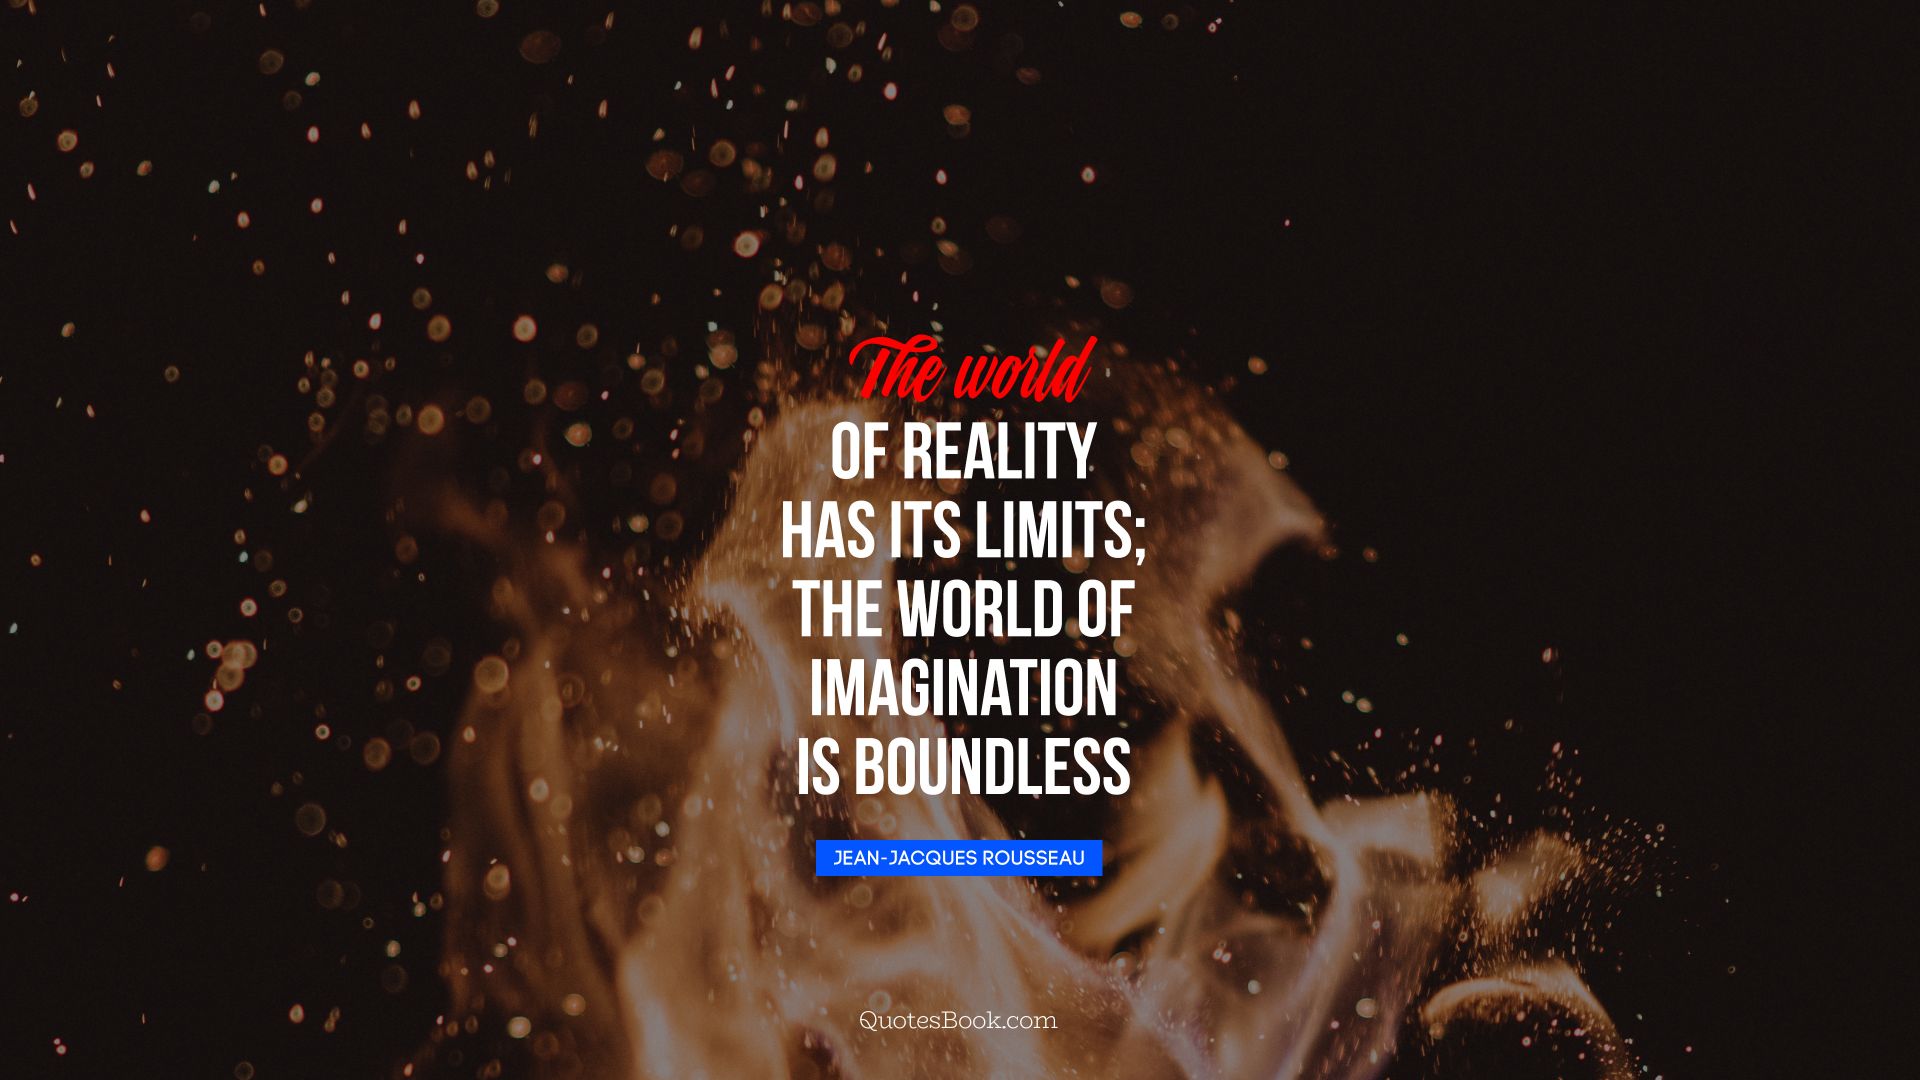 The world of reality has its limits; the world of imagination is boundless. - Quote by Jean-Jacques Rousseau